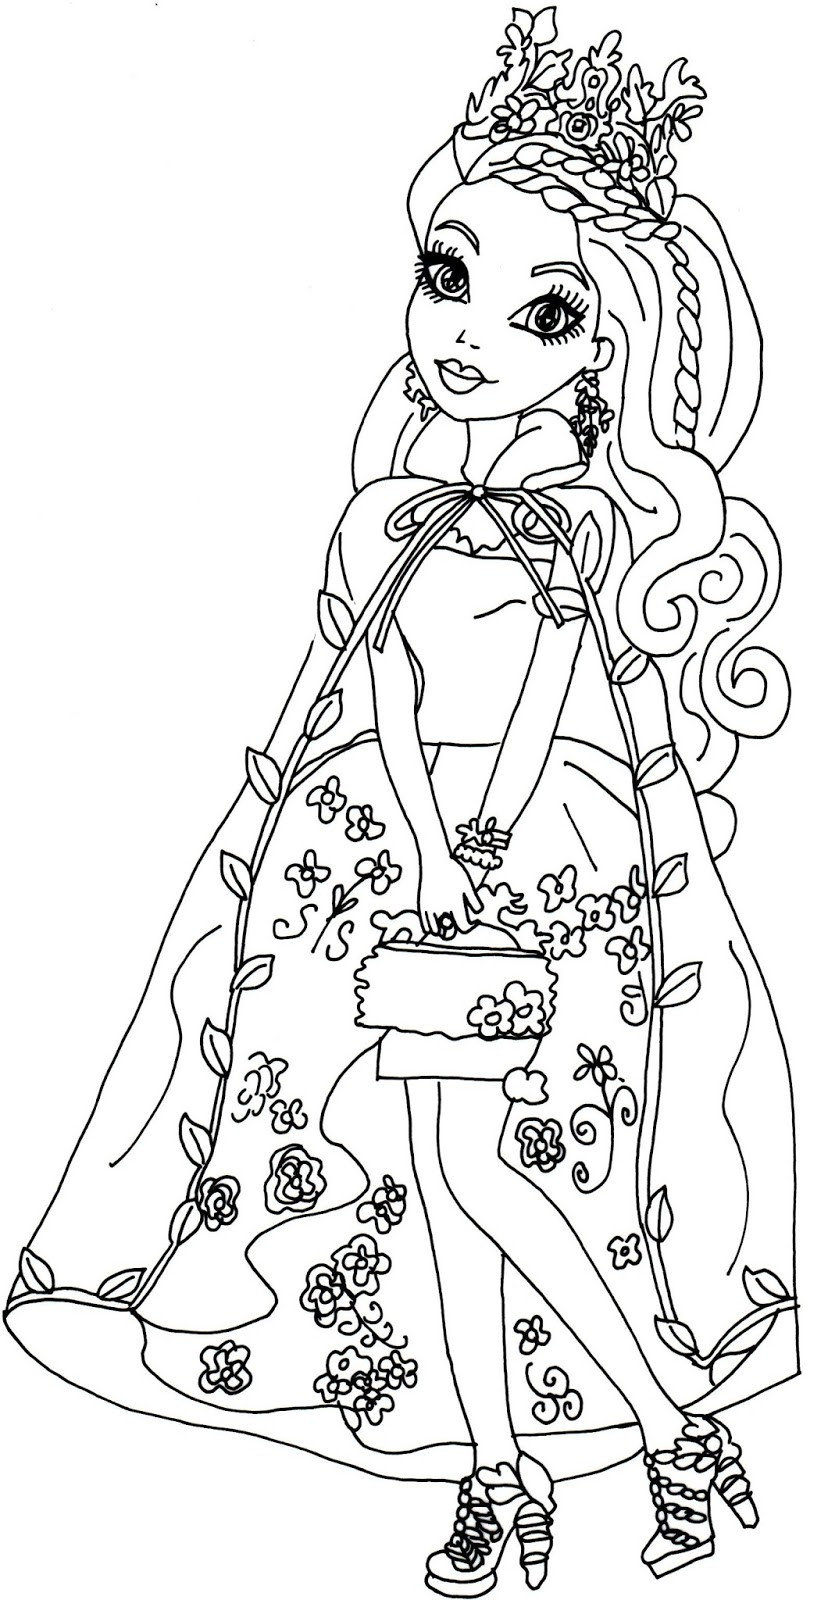 Print Free Coloring Sheets
 Ever After High Coloring Pages Best Coloring Pages For Kids